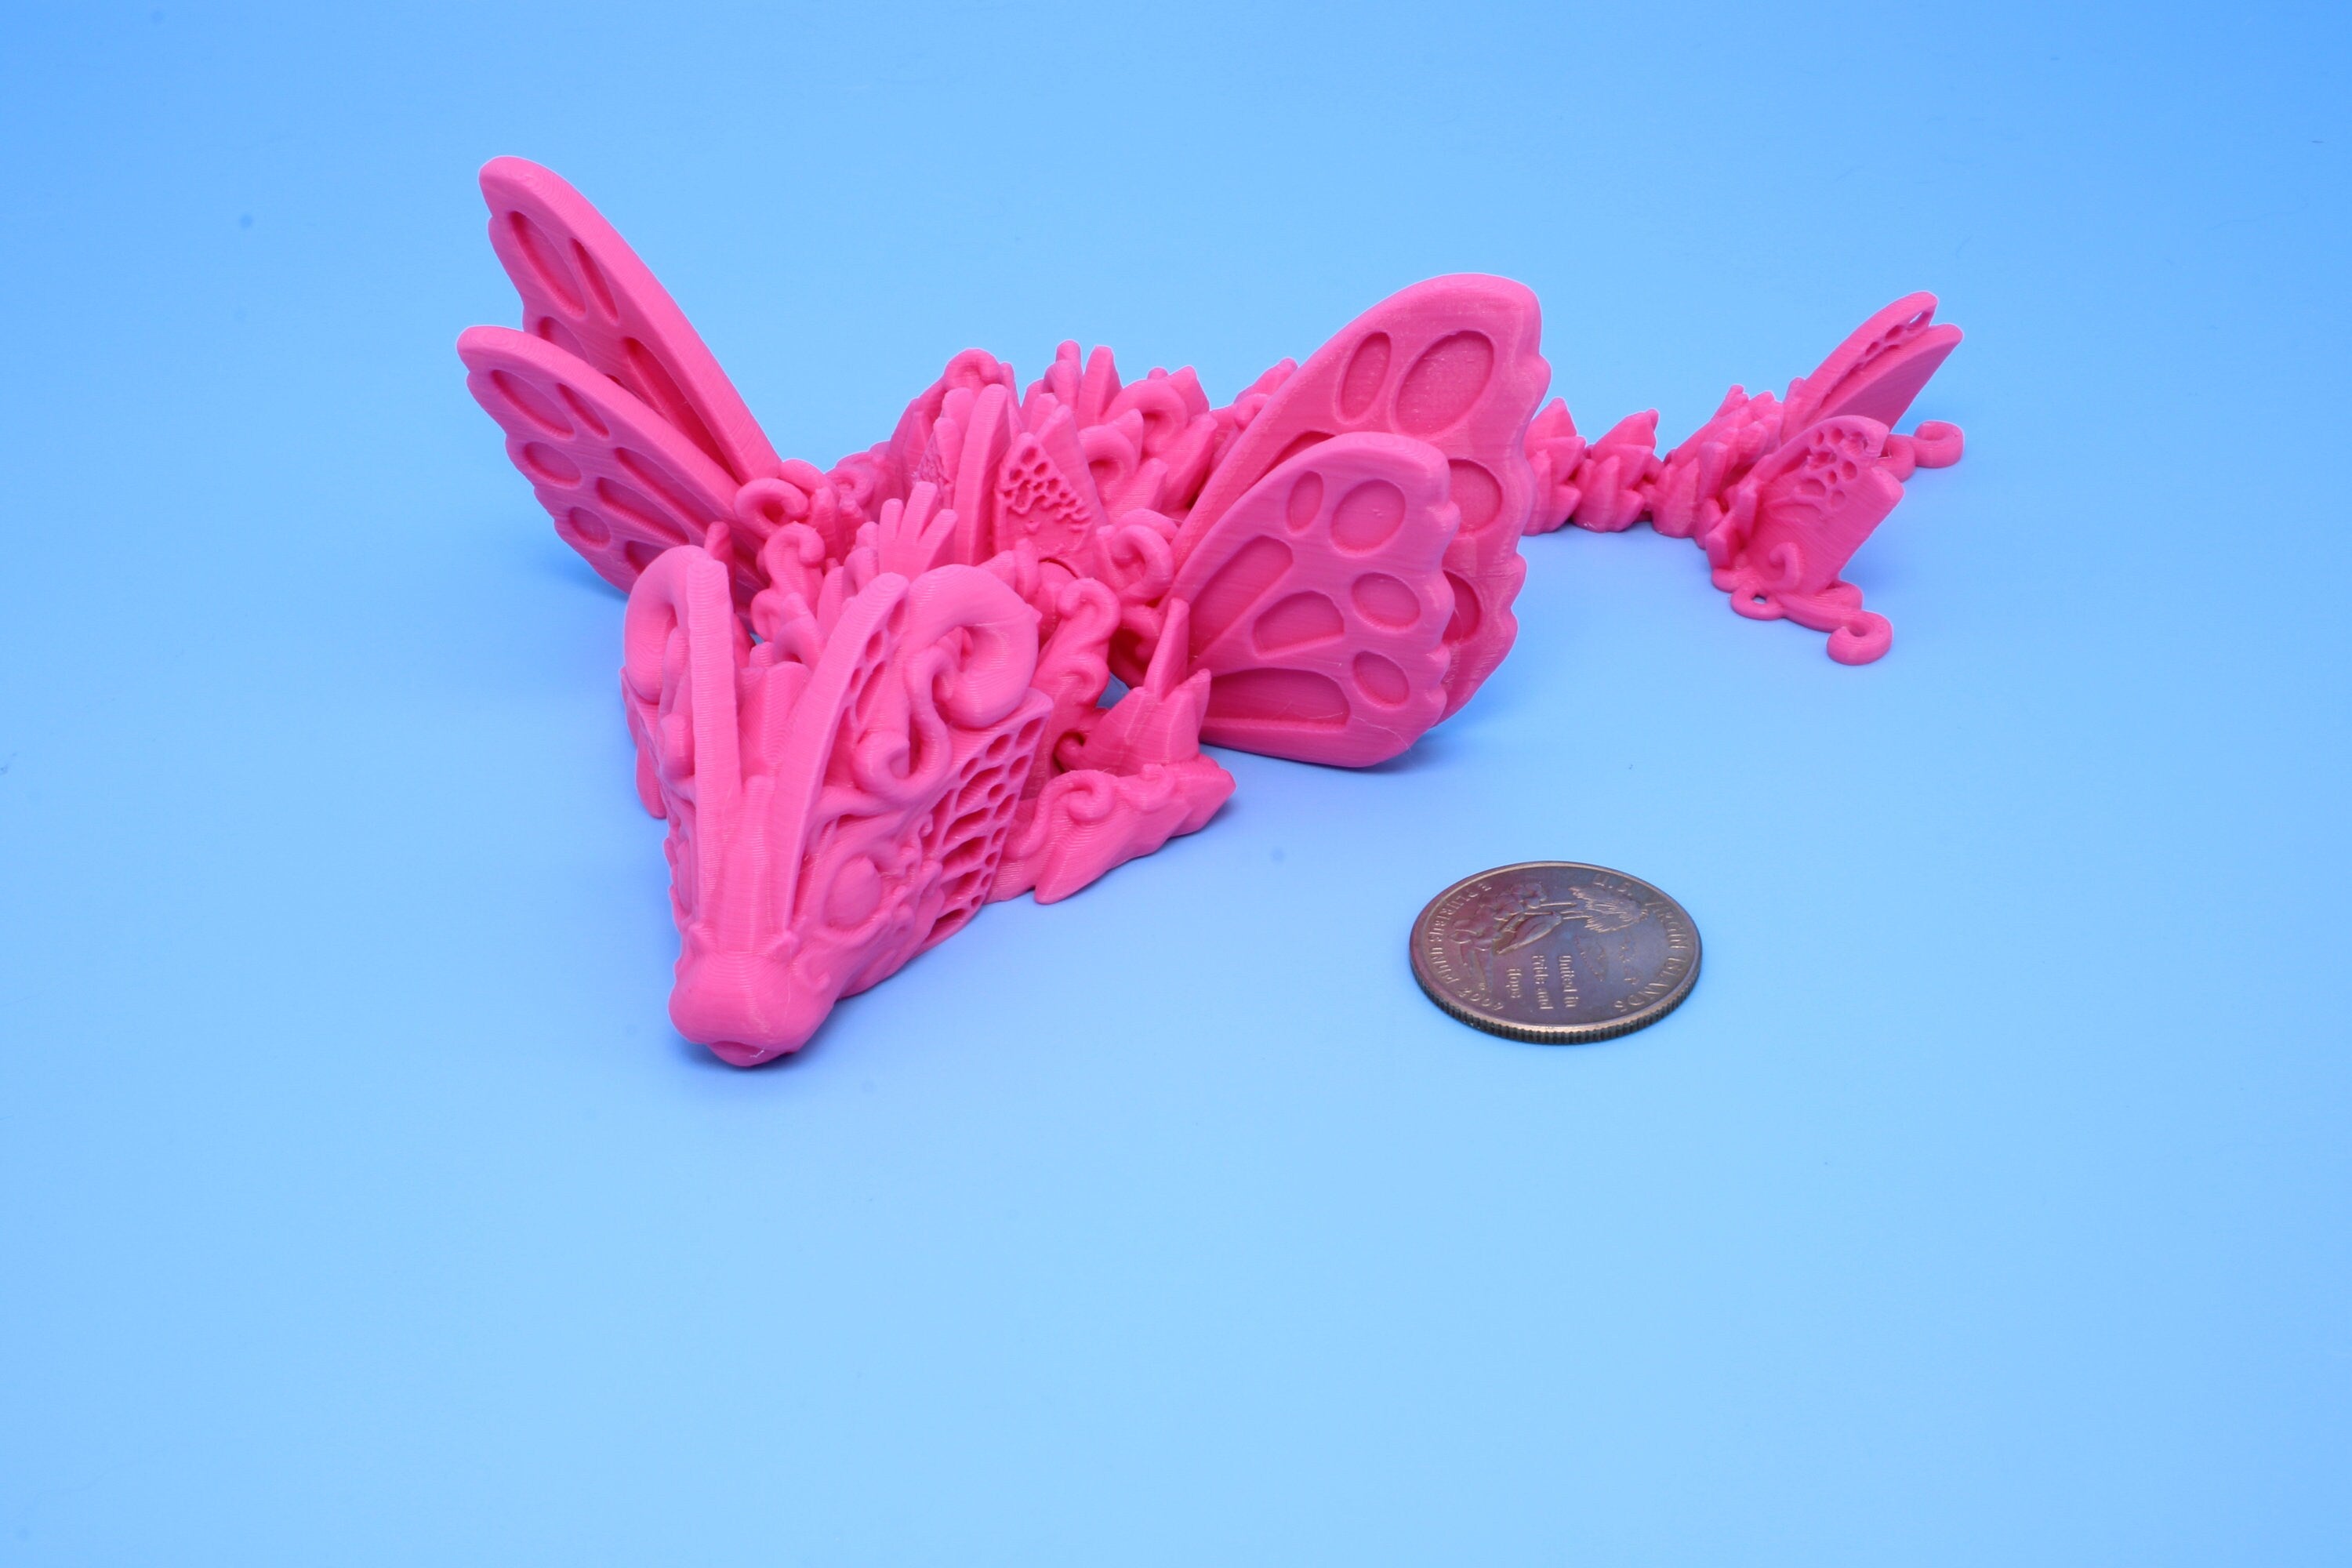 Butterfly Wing Dragon | 3D Printed, Miniature Articulating Dragon 8 in.